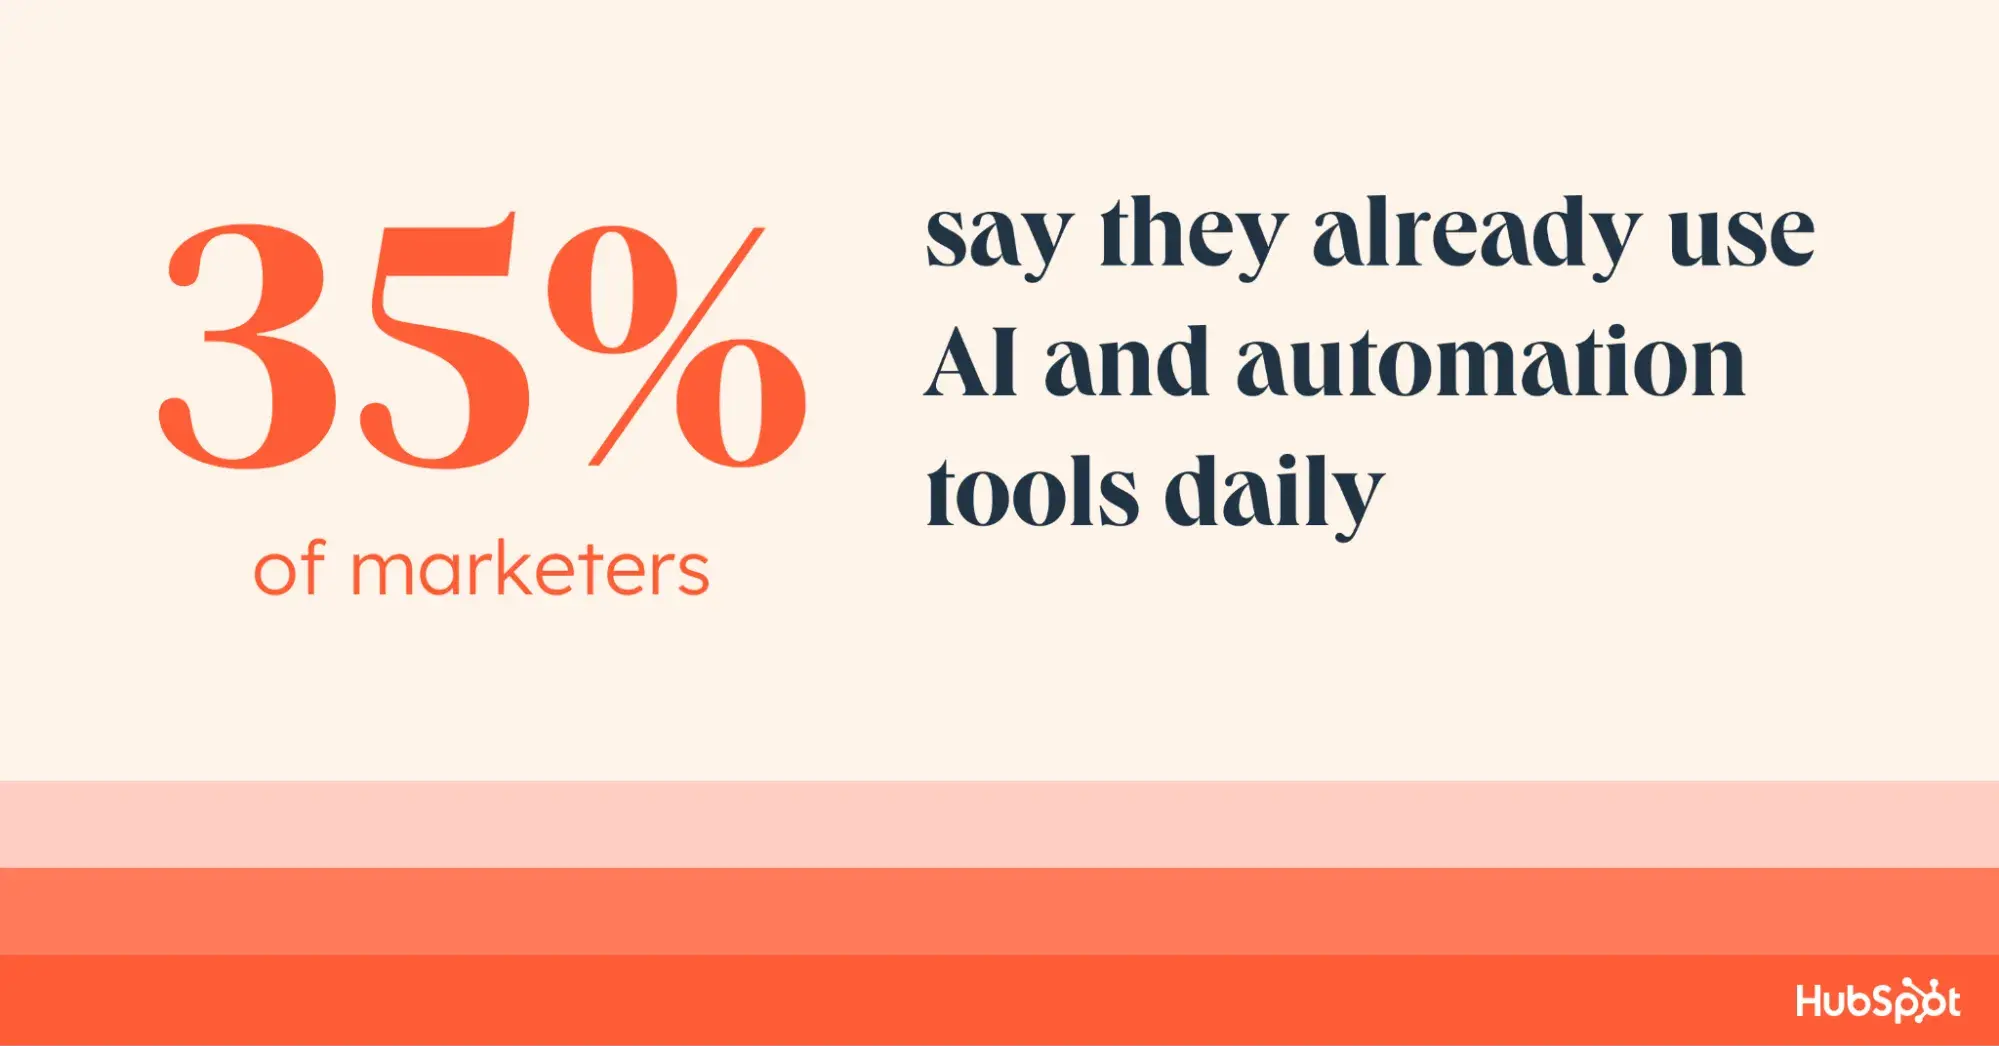 Infographic showing 35% of marketers say they already use AI and automation tools daily